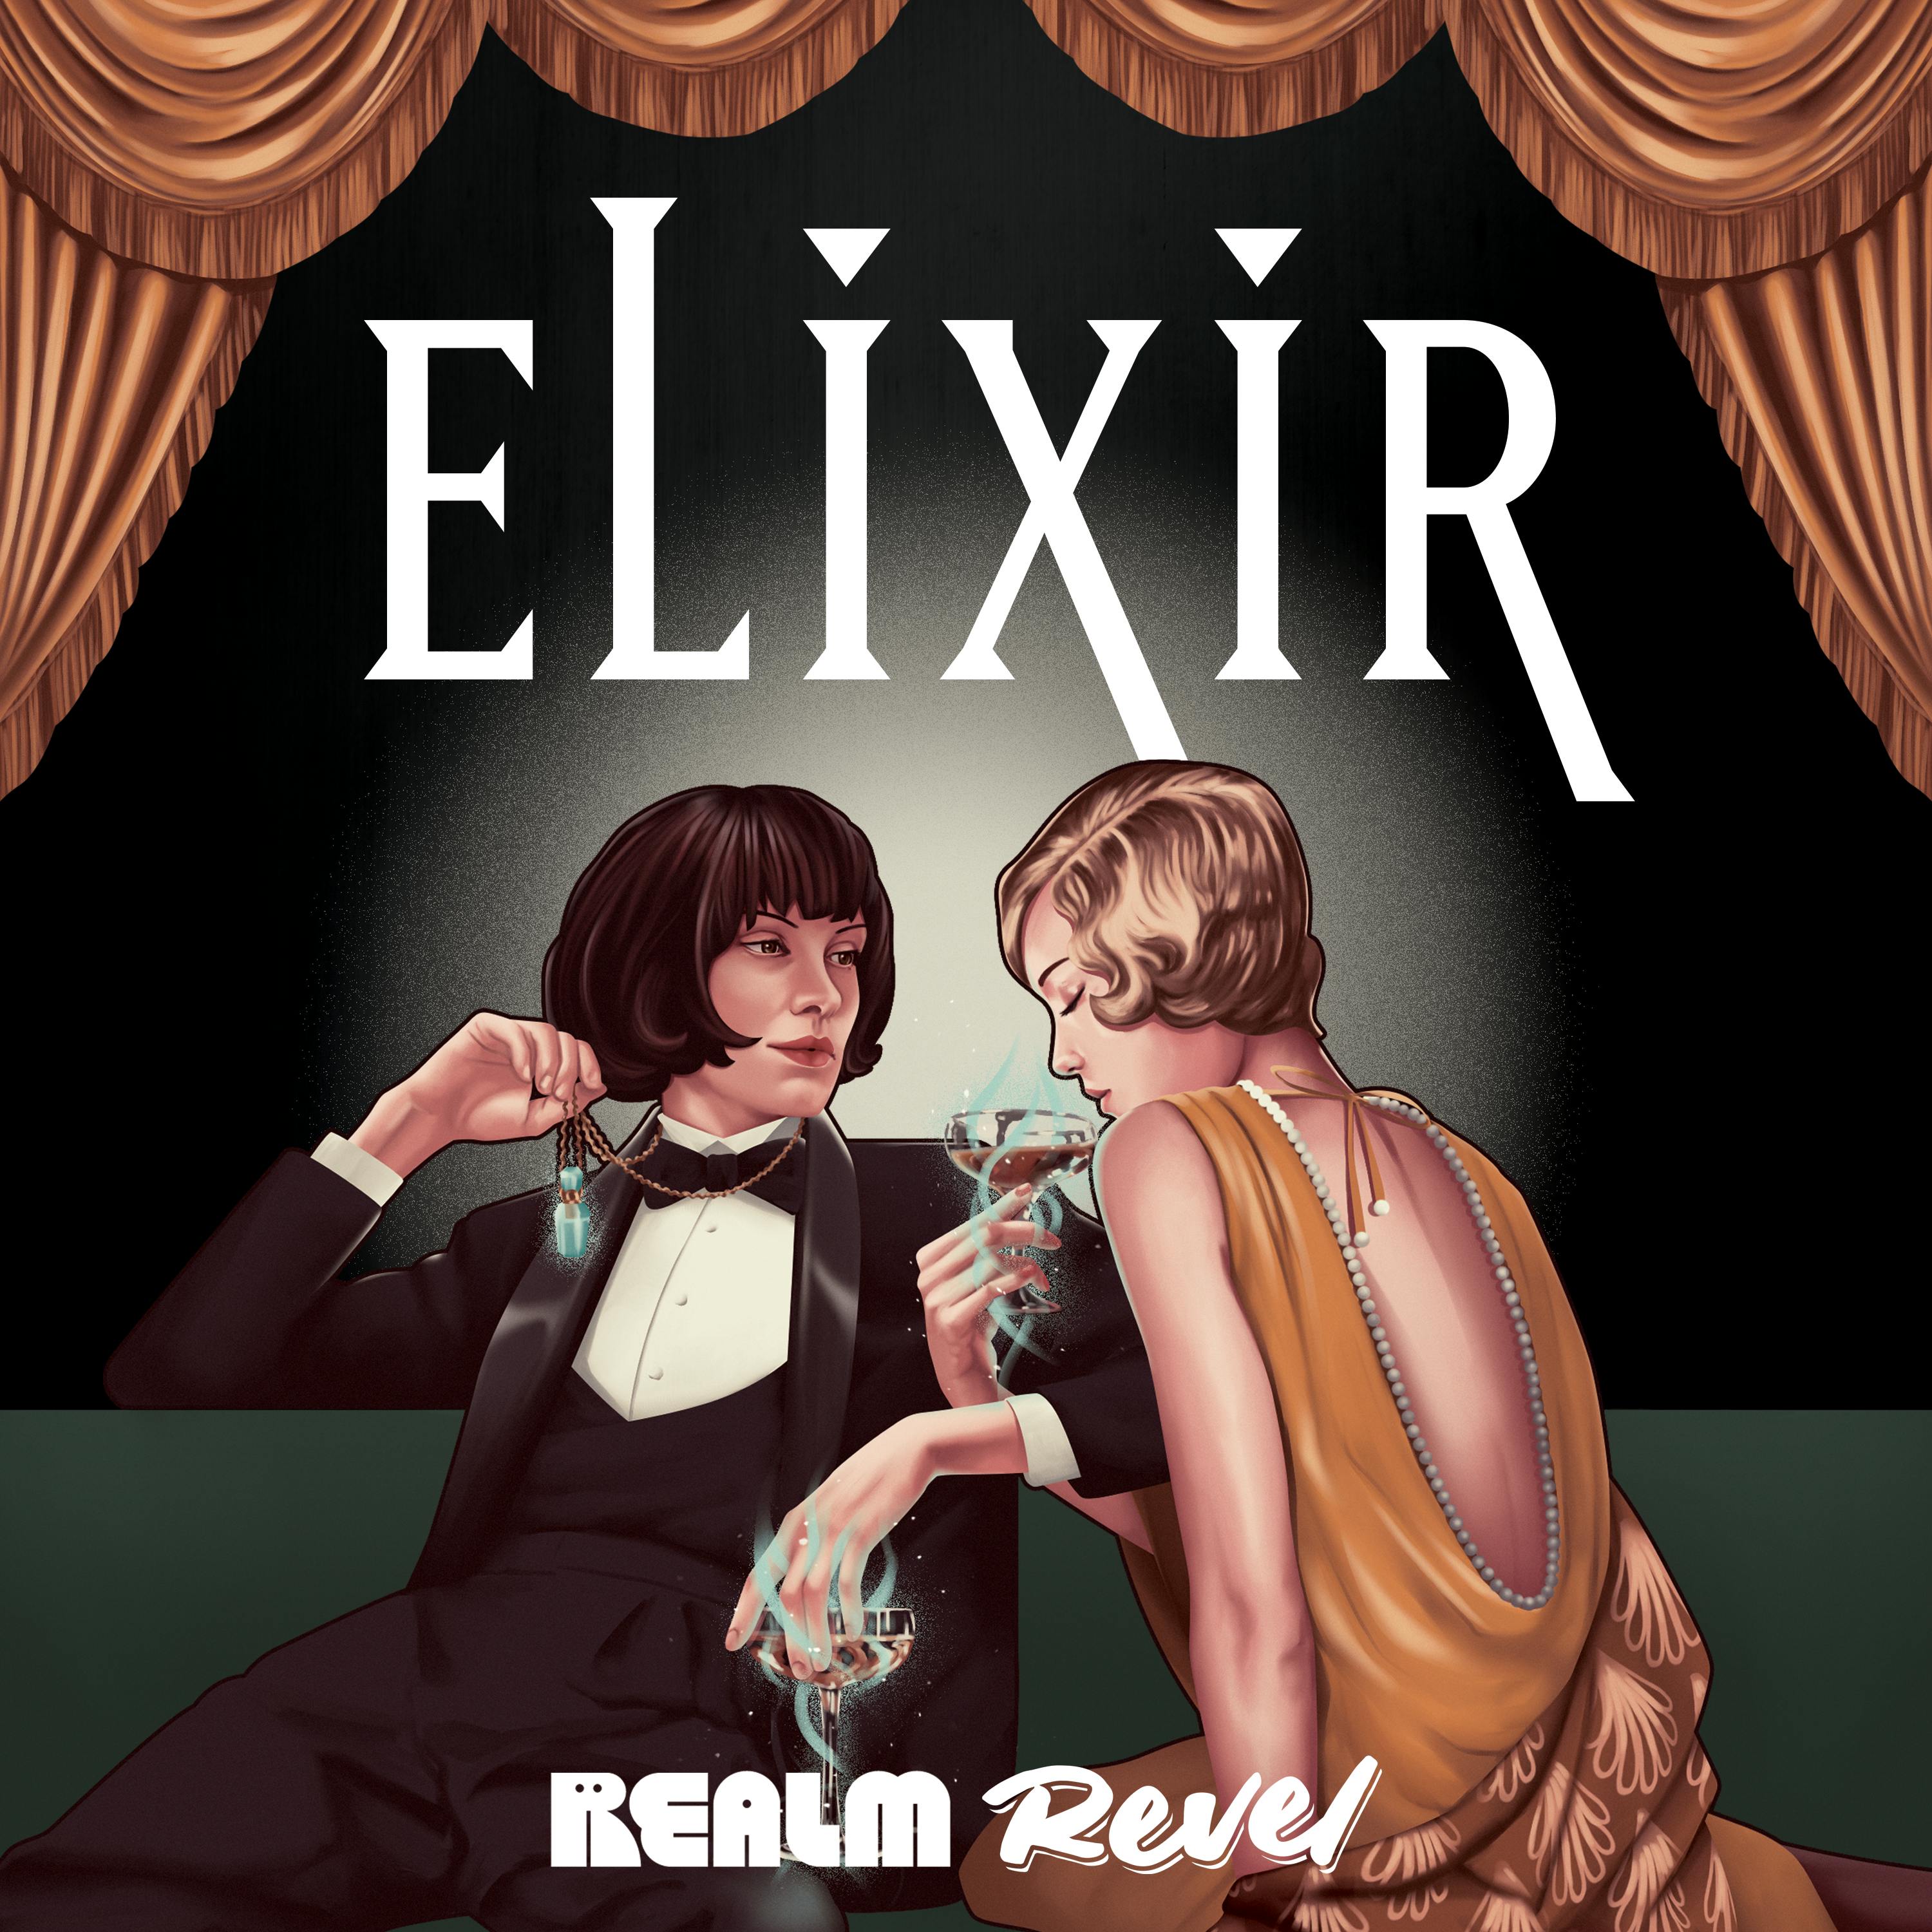 Elixir E7 - Consequences, Intended or Otherwise